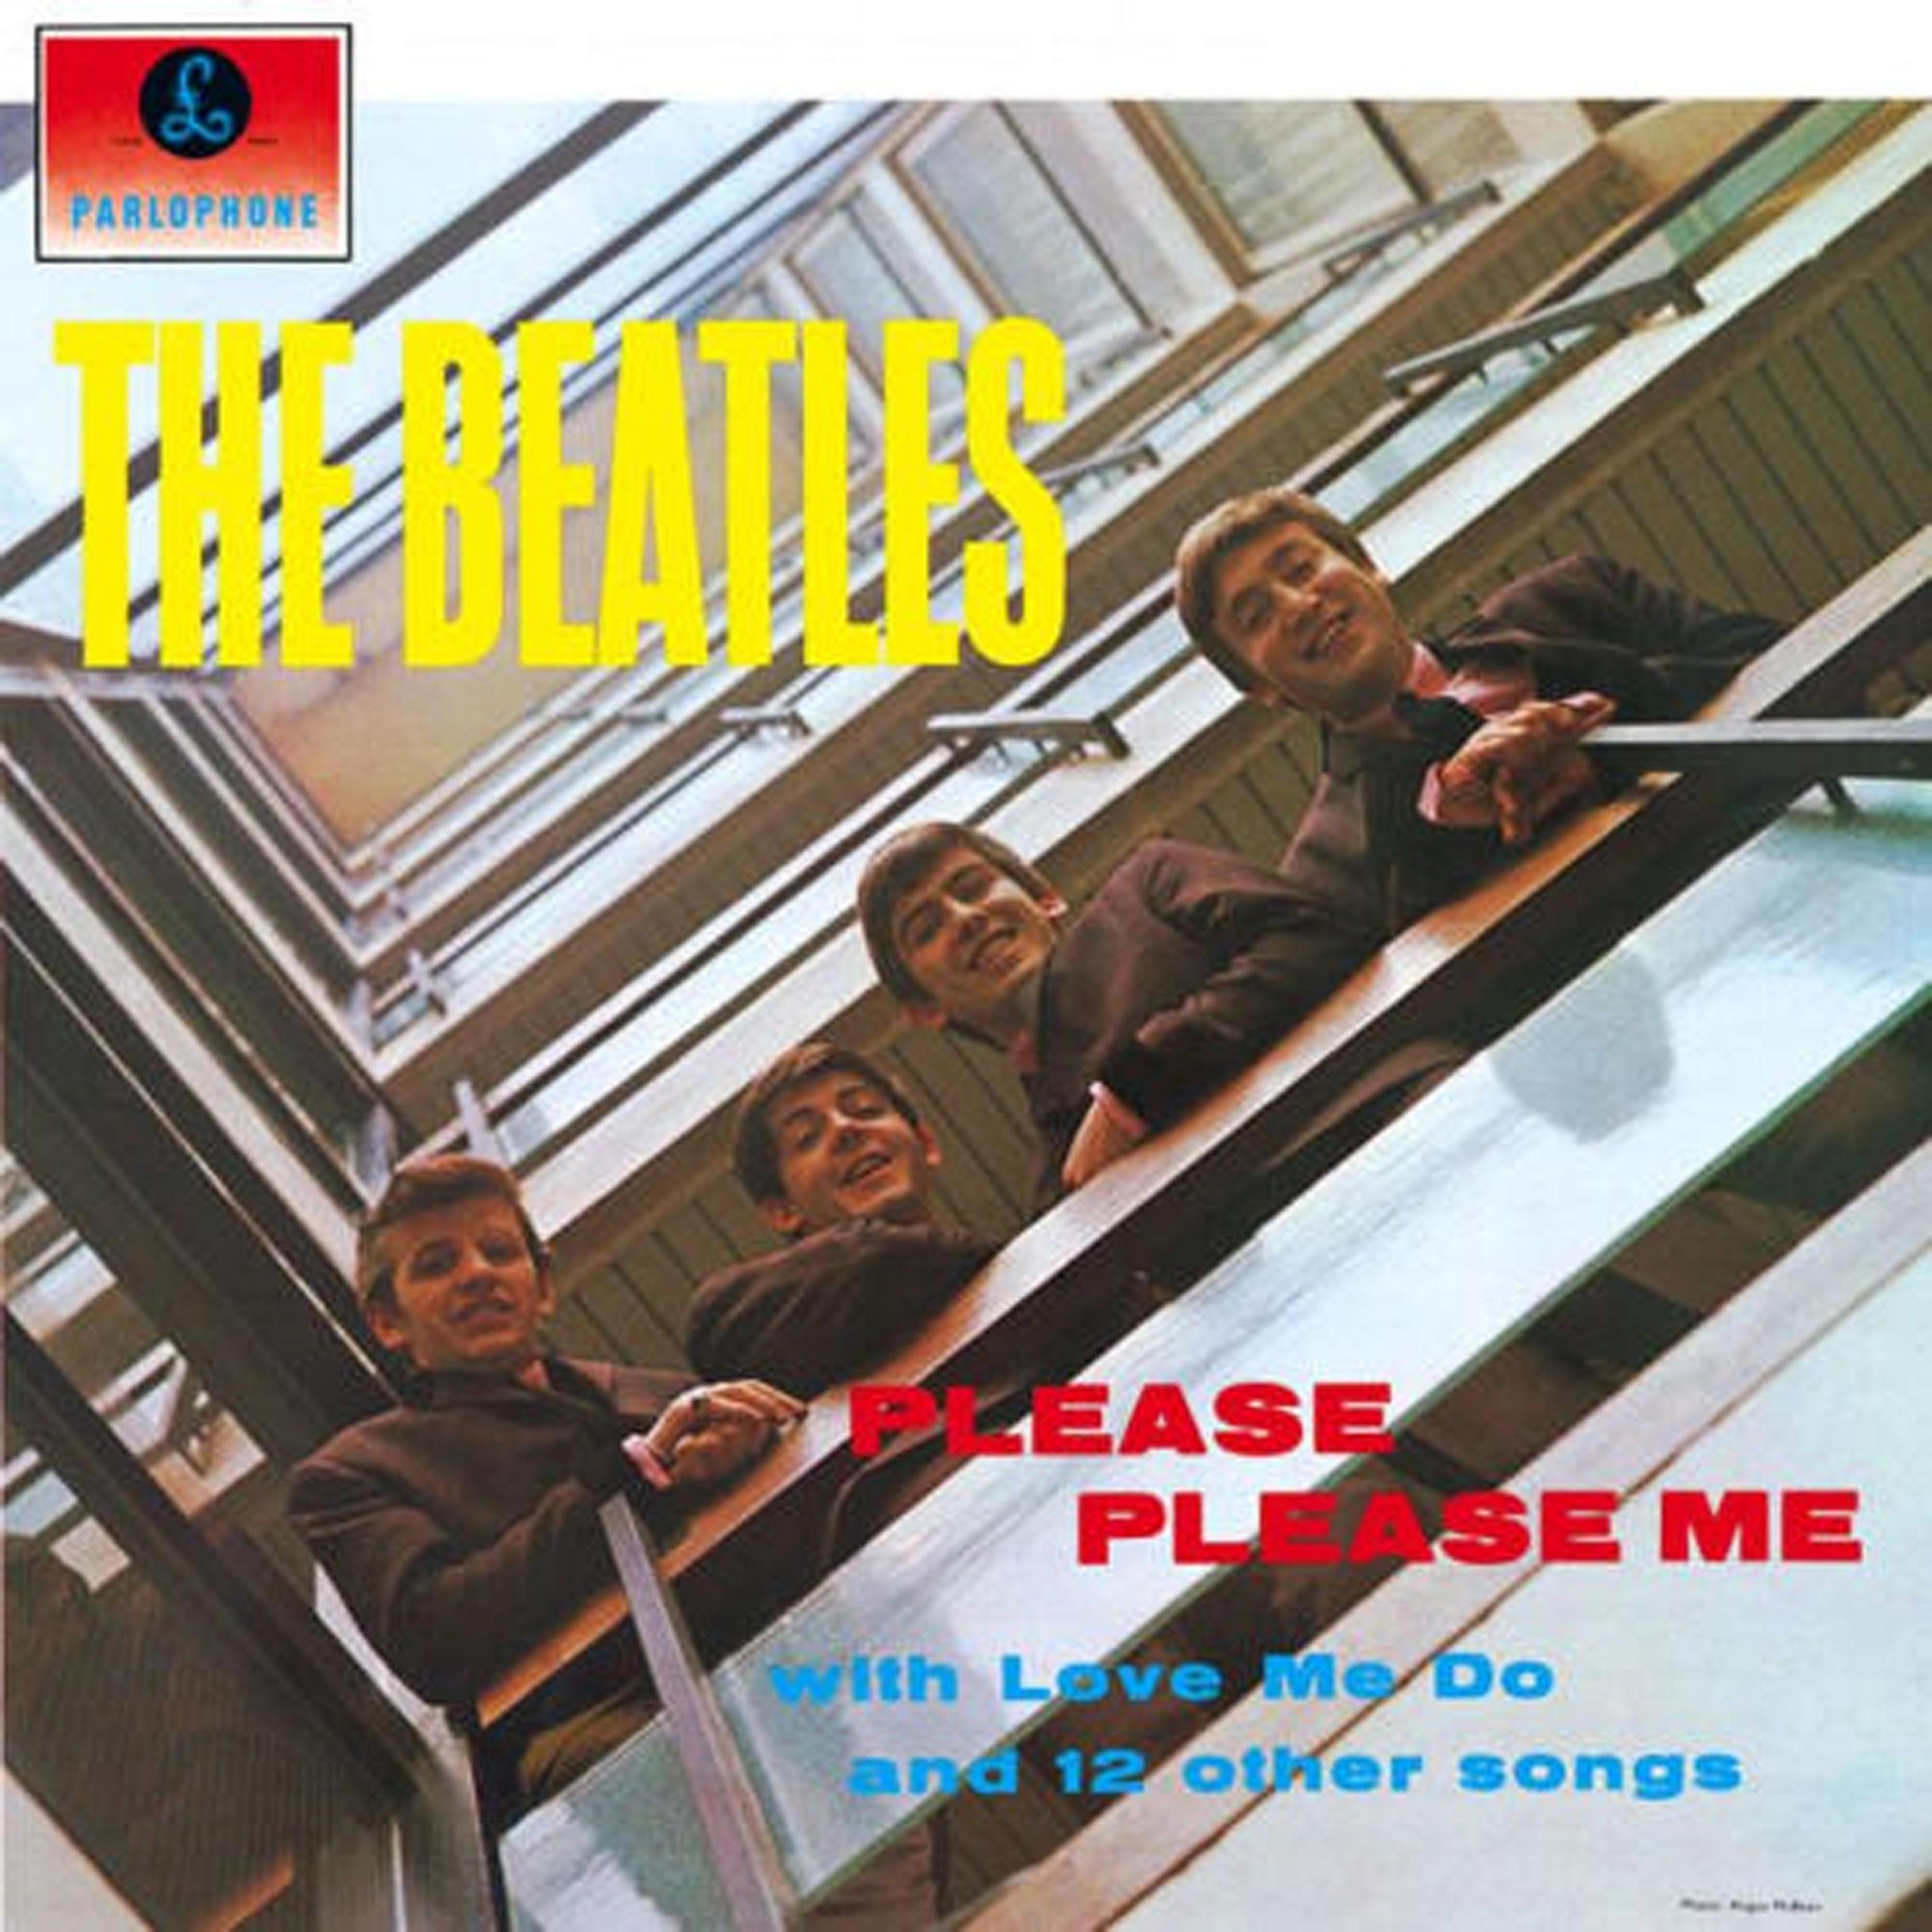 Photo of Please Please Me by The Beatles is one of the best debuts ever